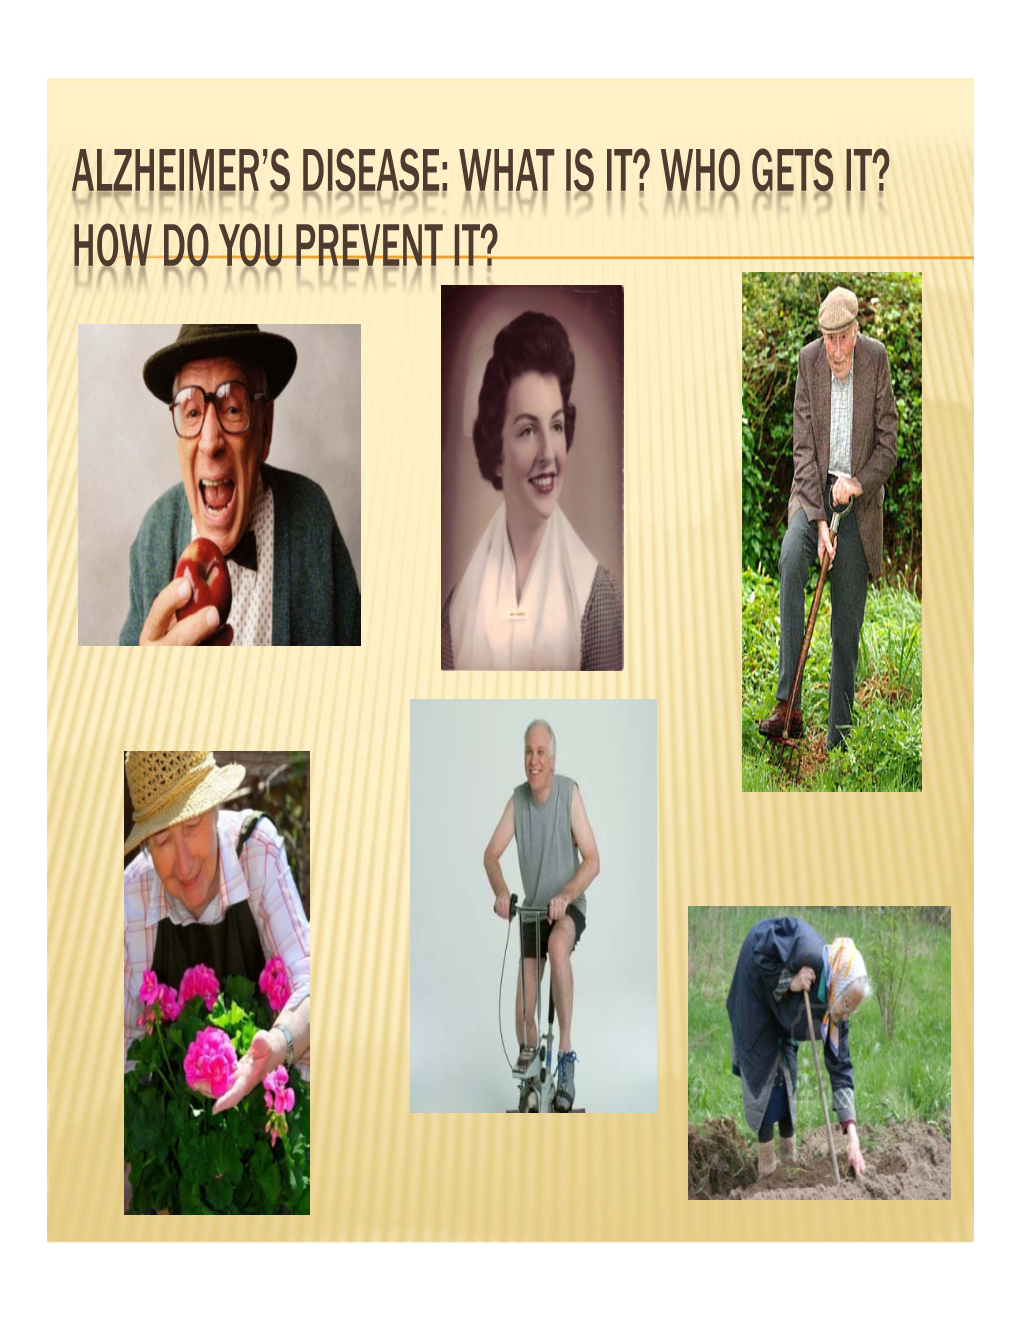 Alzheimer's Disease: What Is It? Who Gets It? How Do You Prevent